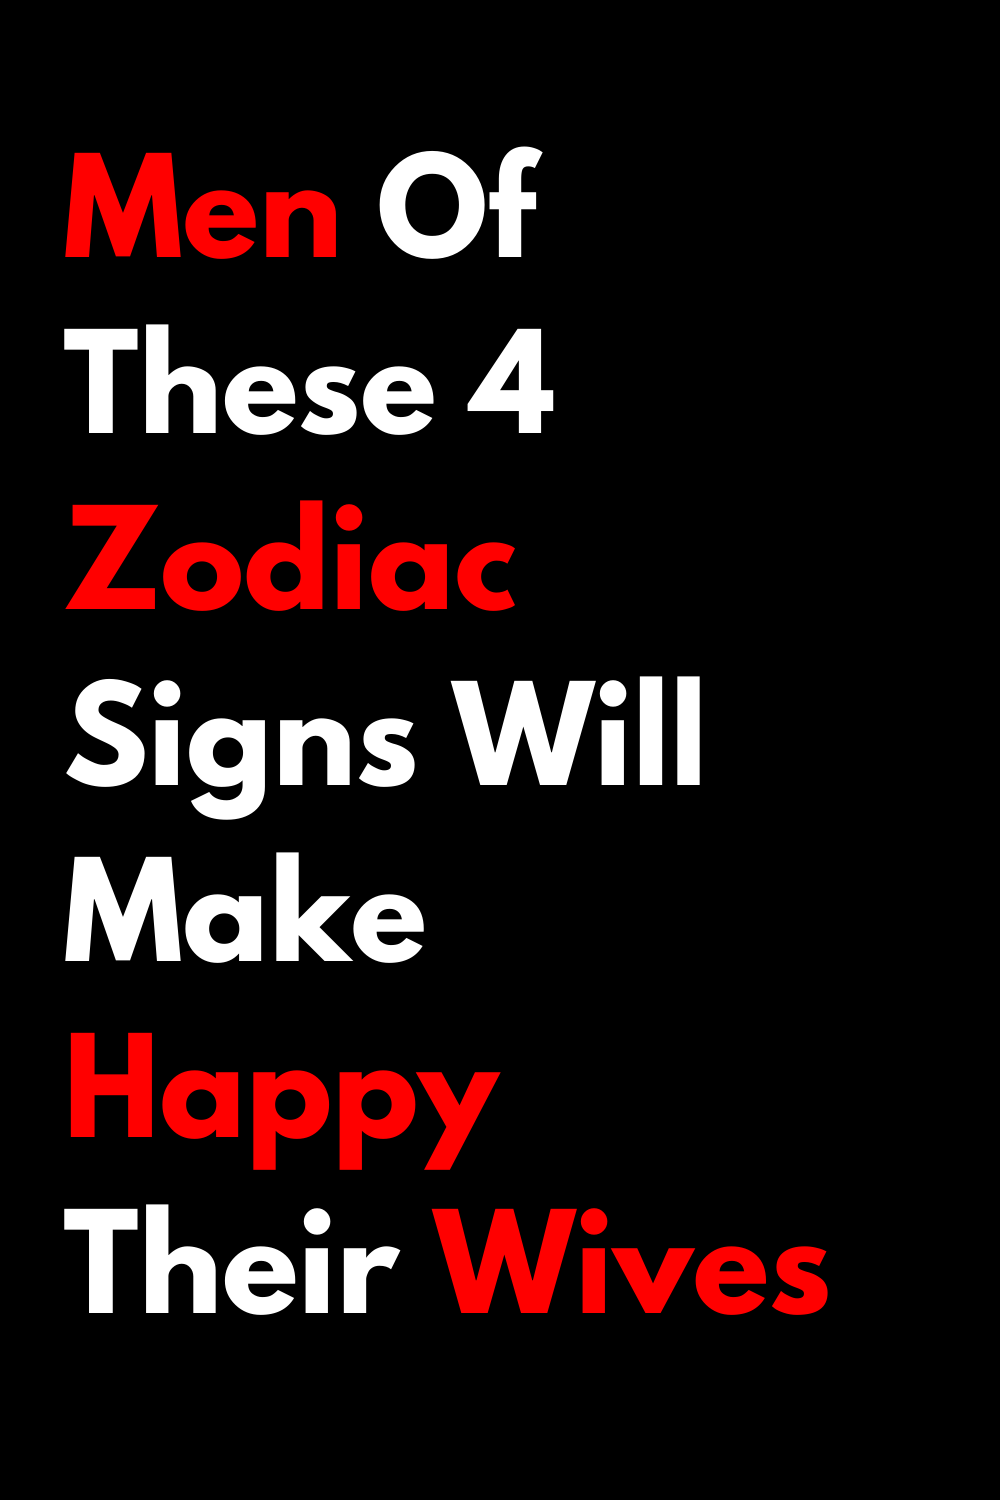 Men Of These 4 Zodiac Signs Will Make Happy Their Wives